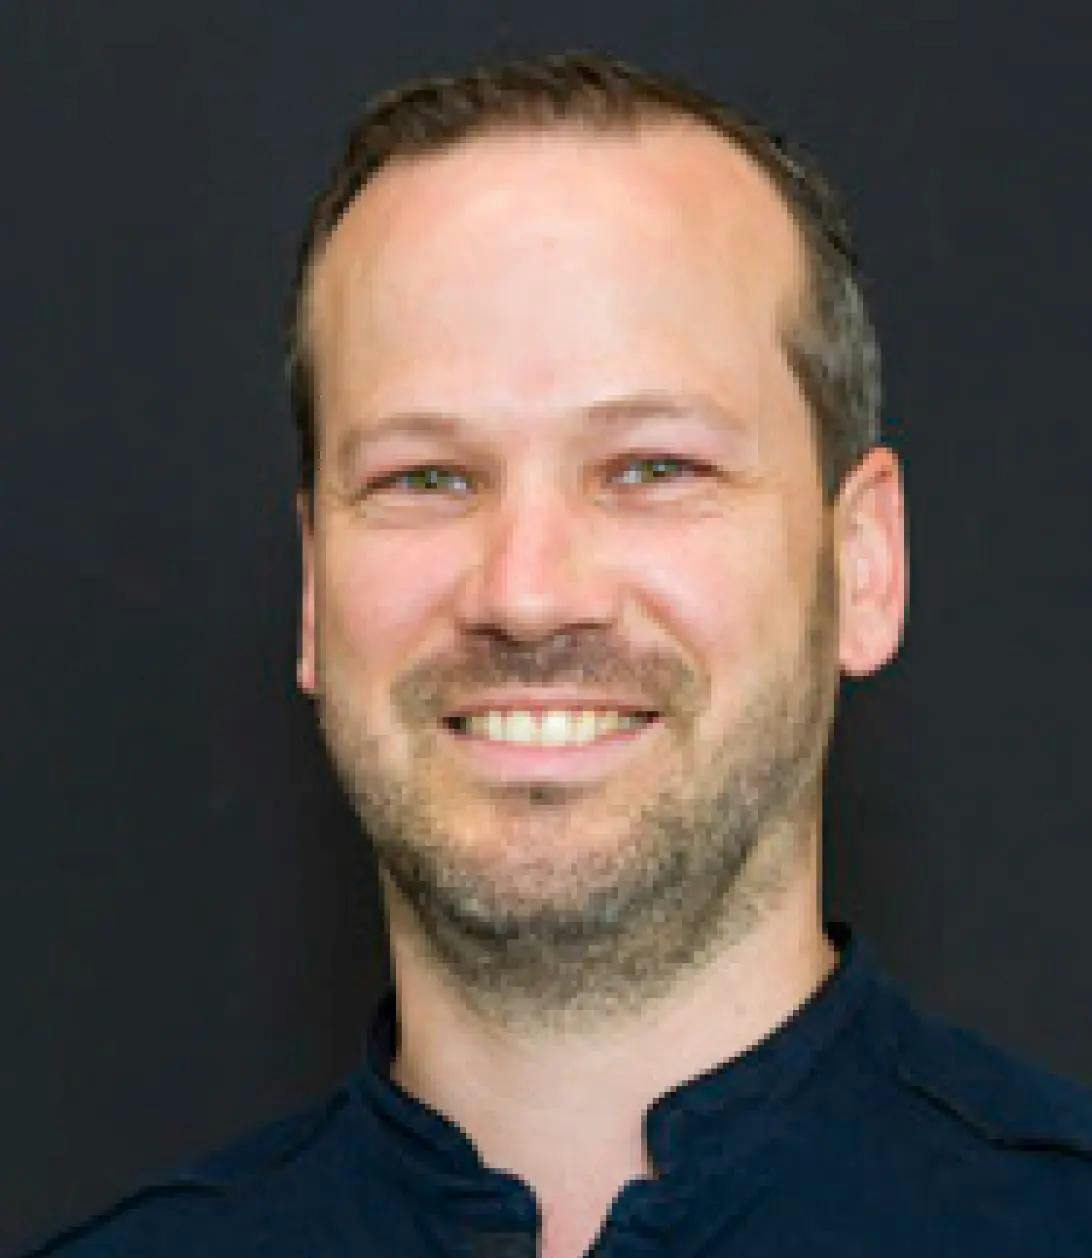 Davy Guillarme, Institute of Pharmaceutical Sciences of Western Switzerland and the School of Pharmaceutical Sciences at the University of Geneva (Switzerland)